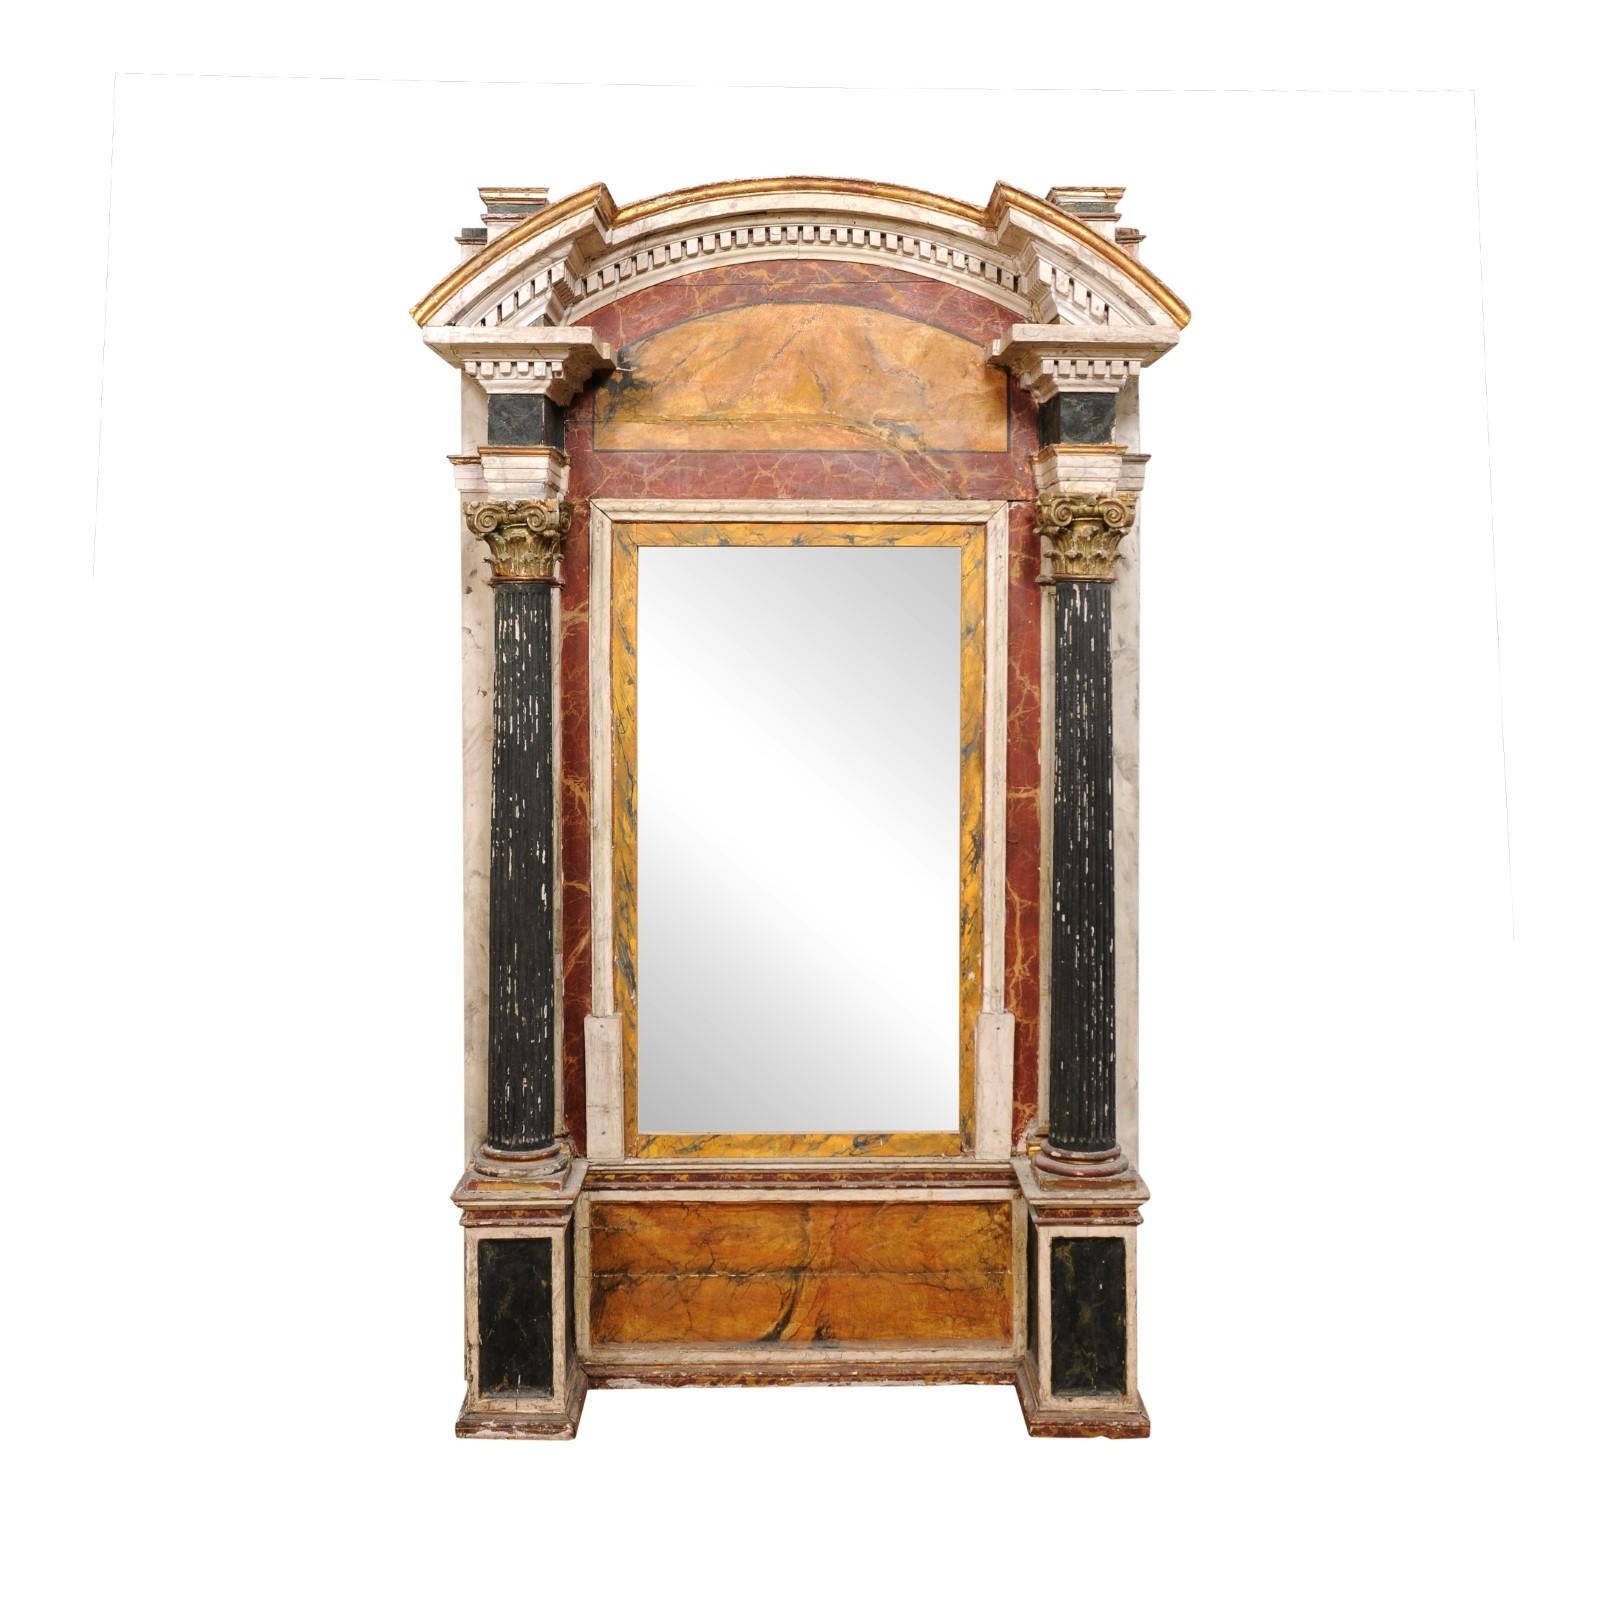 An Italian large-scale architectural floor mirror, with its original paint, from the 19th century. This antique mirror from Italy is grand in scale, standing just shy of 8.5 feet in height, and over 5 feet wide. This 19th century architectural